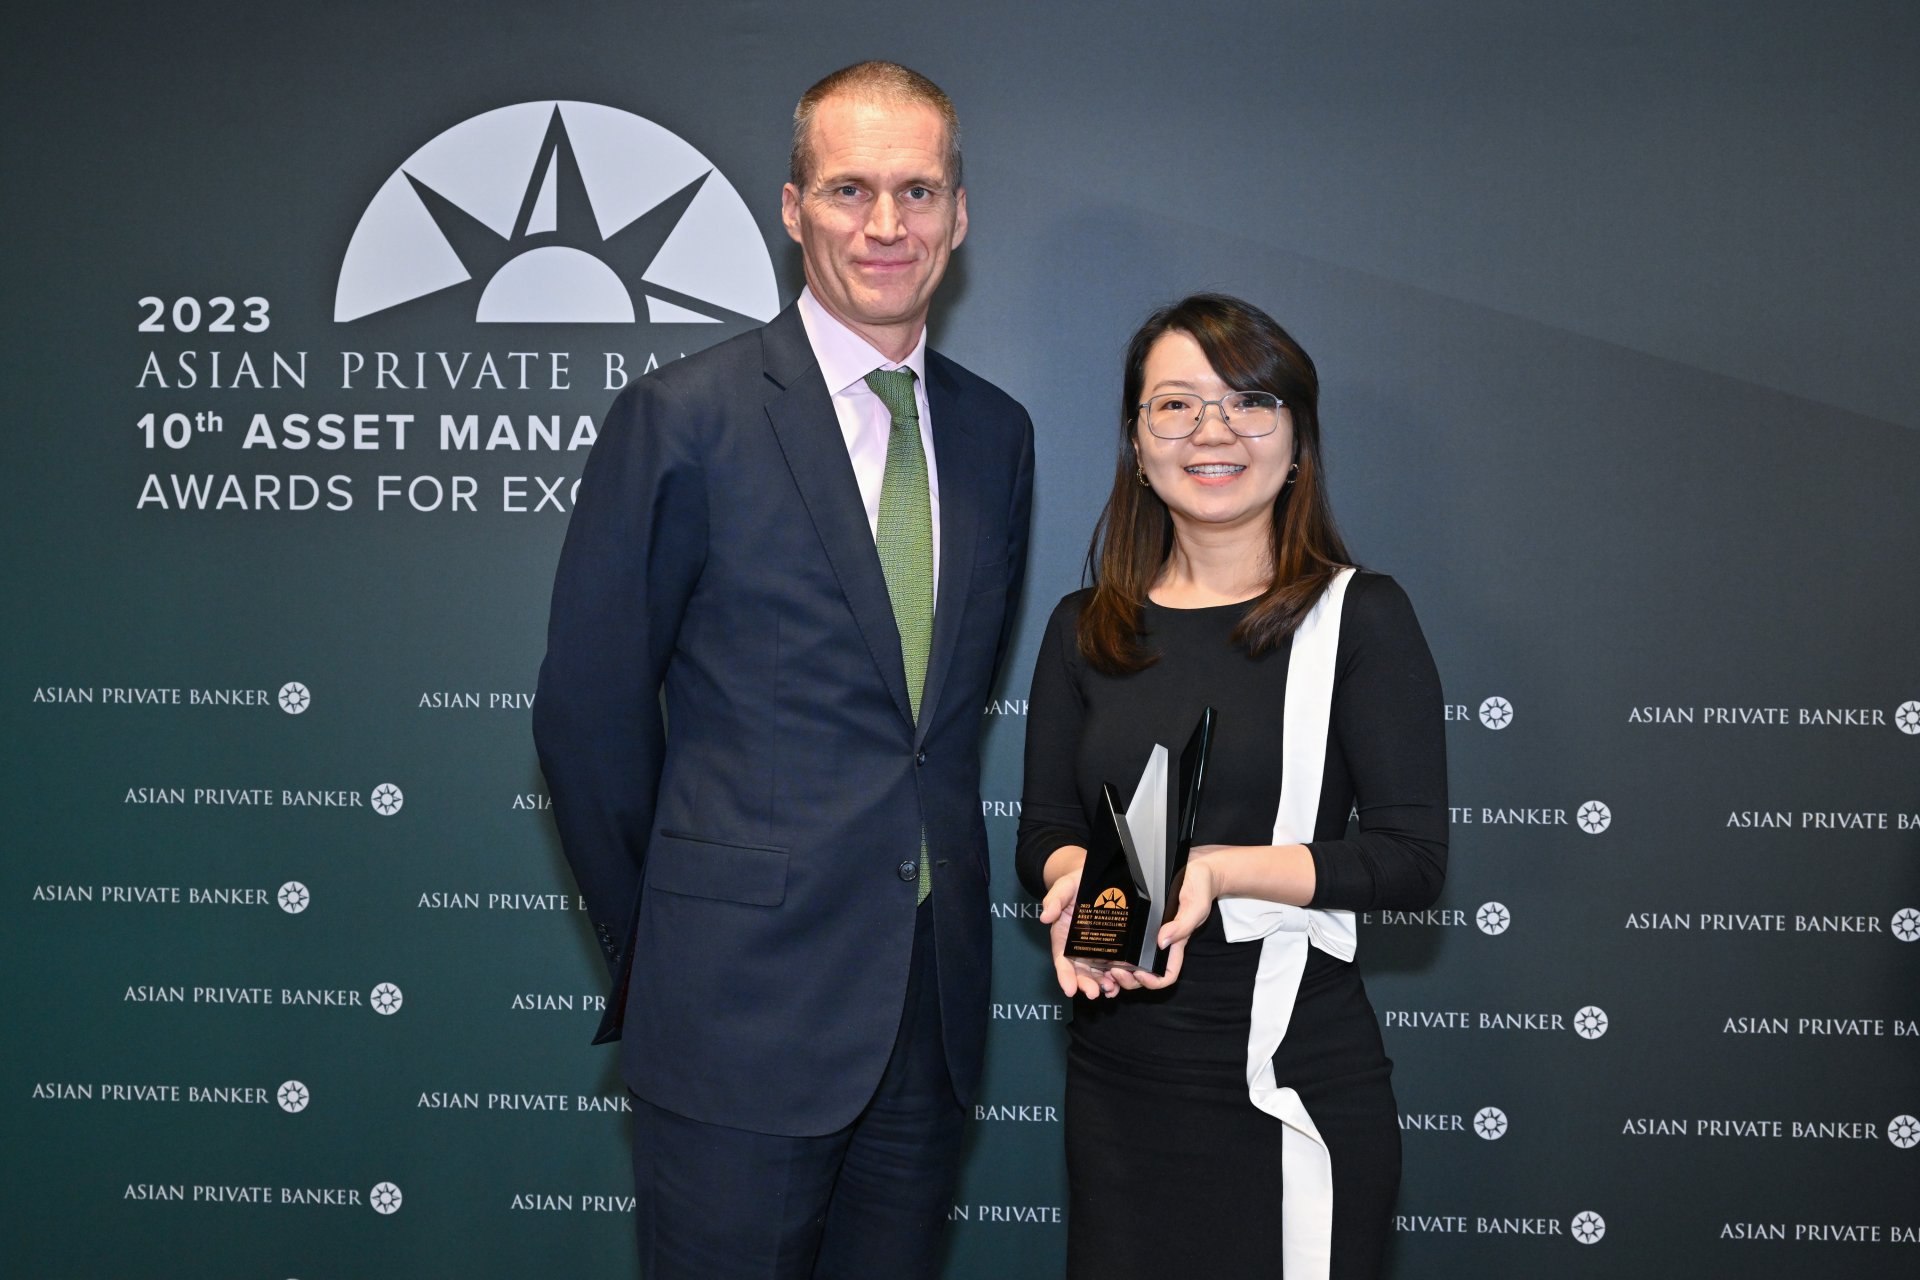 Jake Nilsson and MeiLin Tan of Federated Hermes collect their win for Best Fund Provider - Asia Pacific Equity